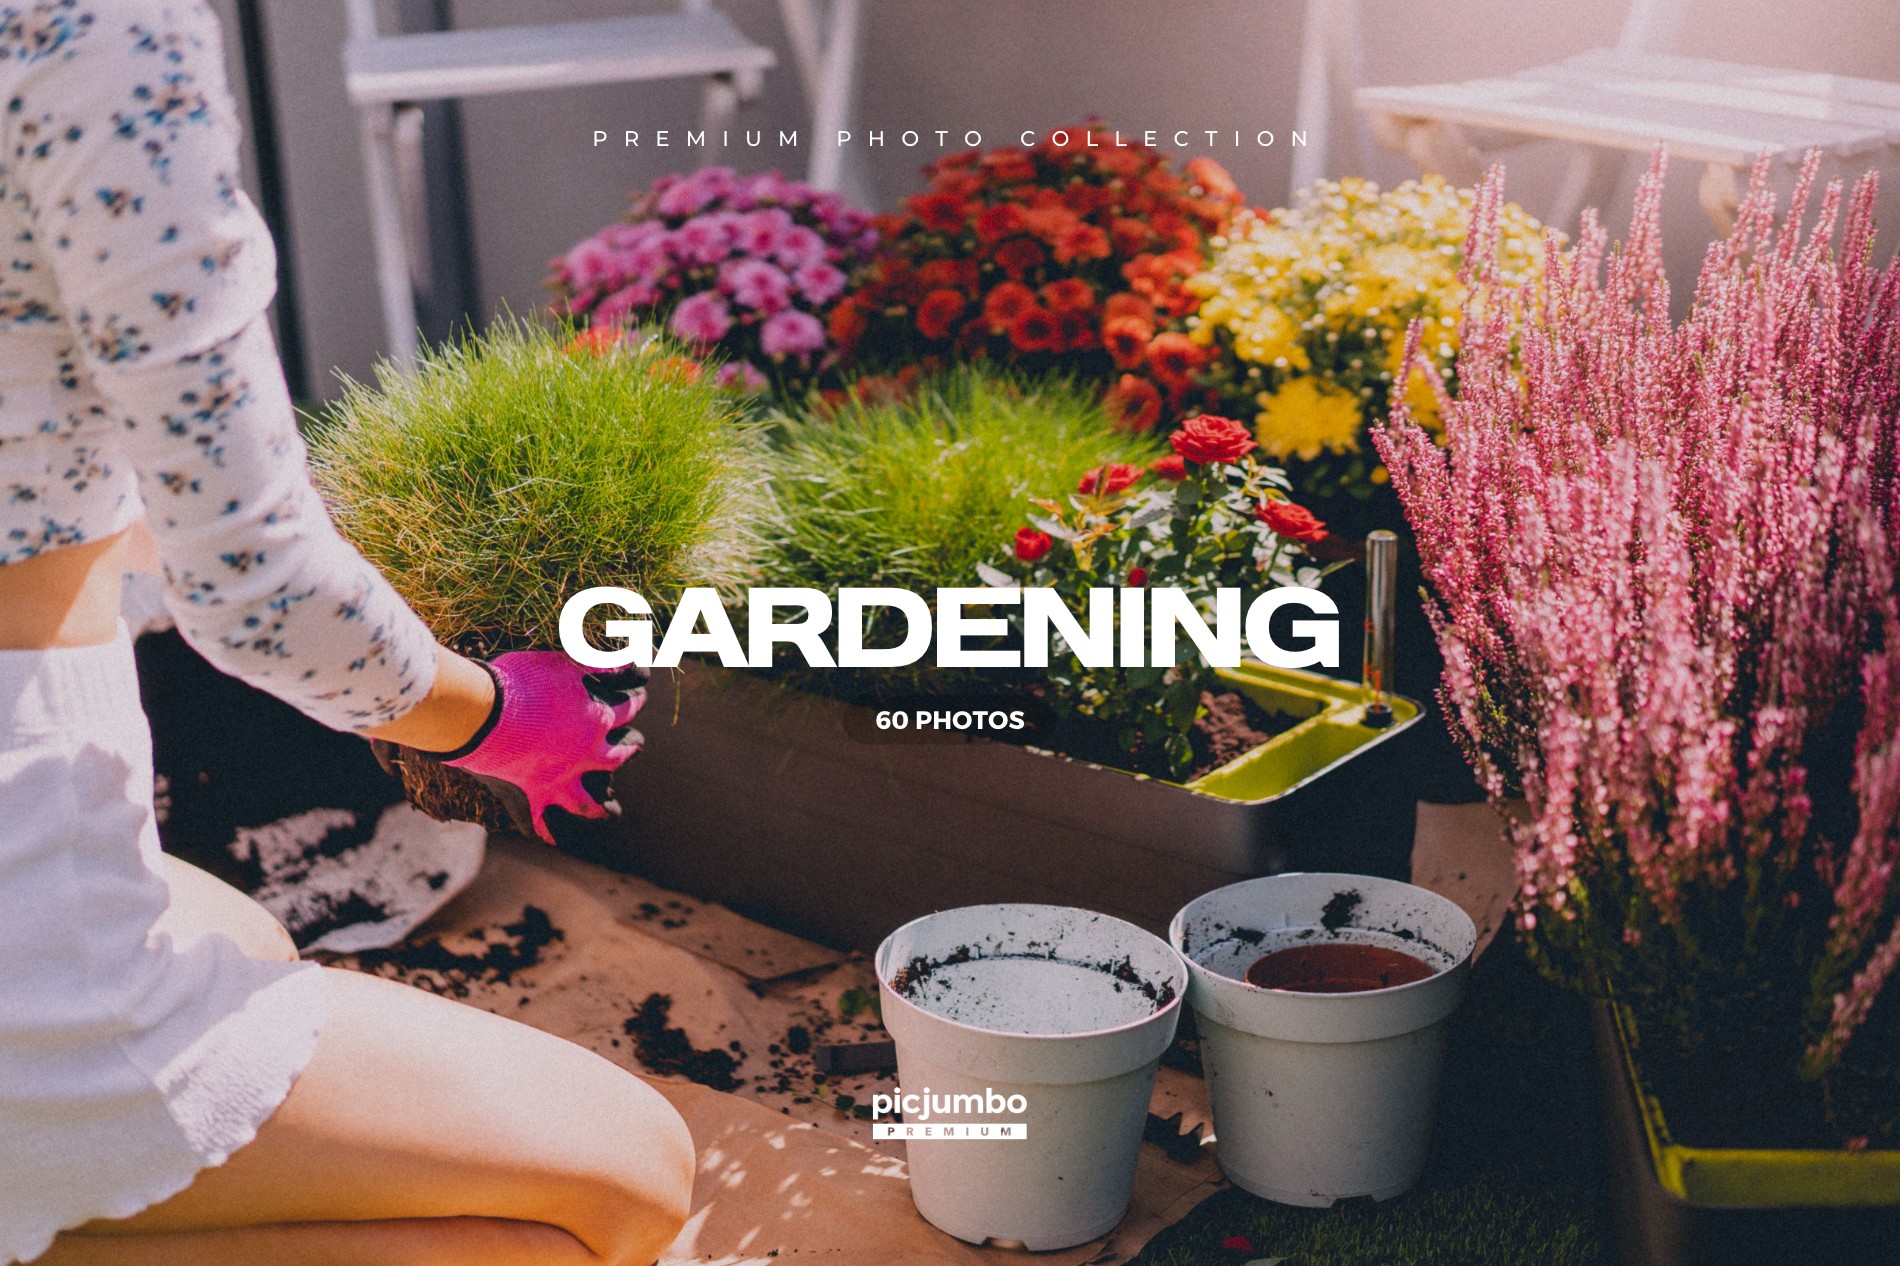 Gardening Stock Photo Collection